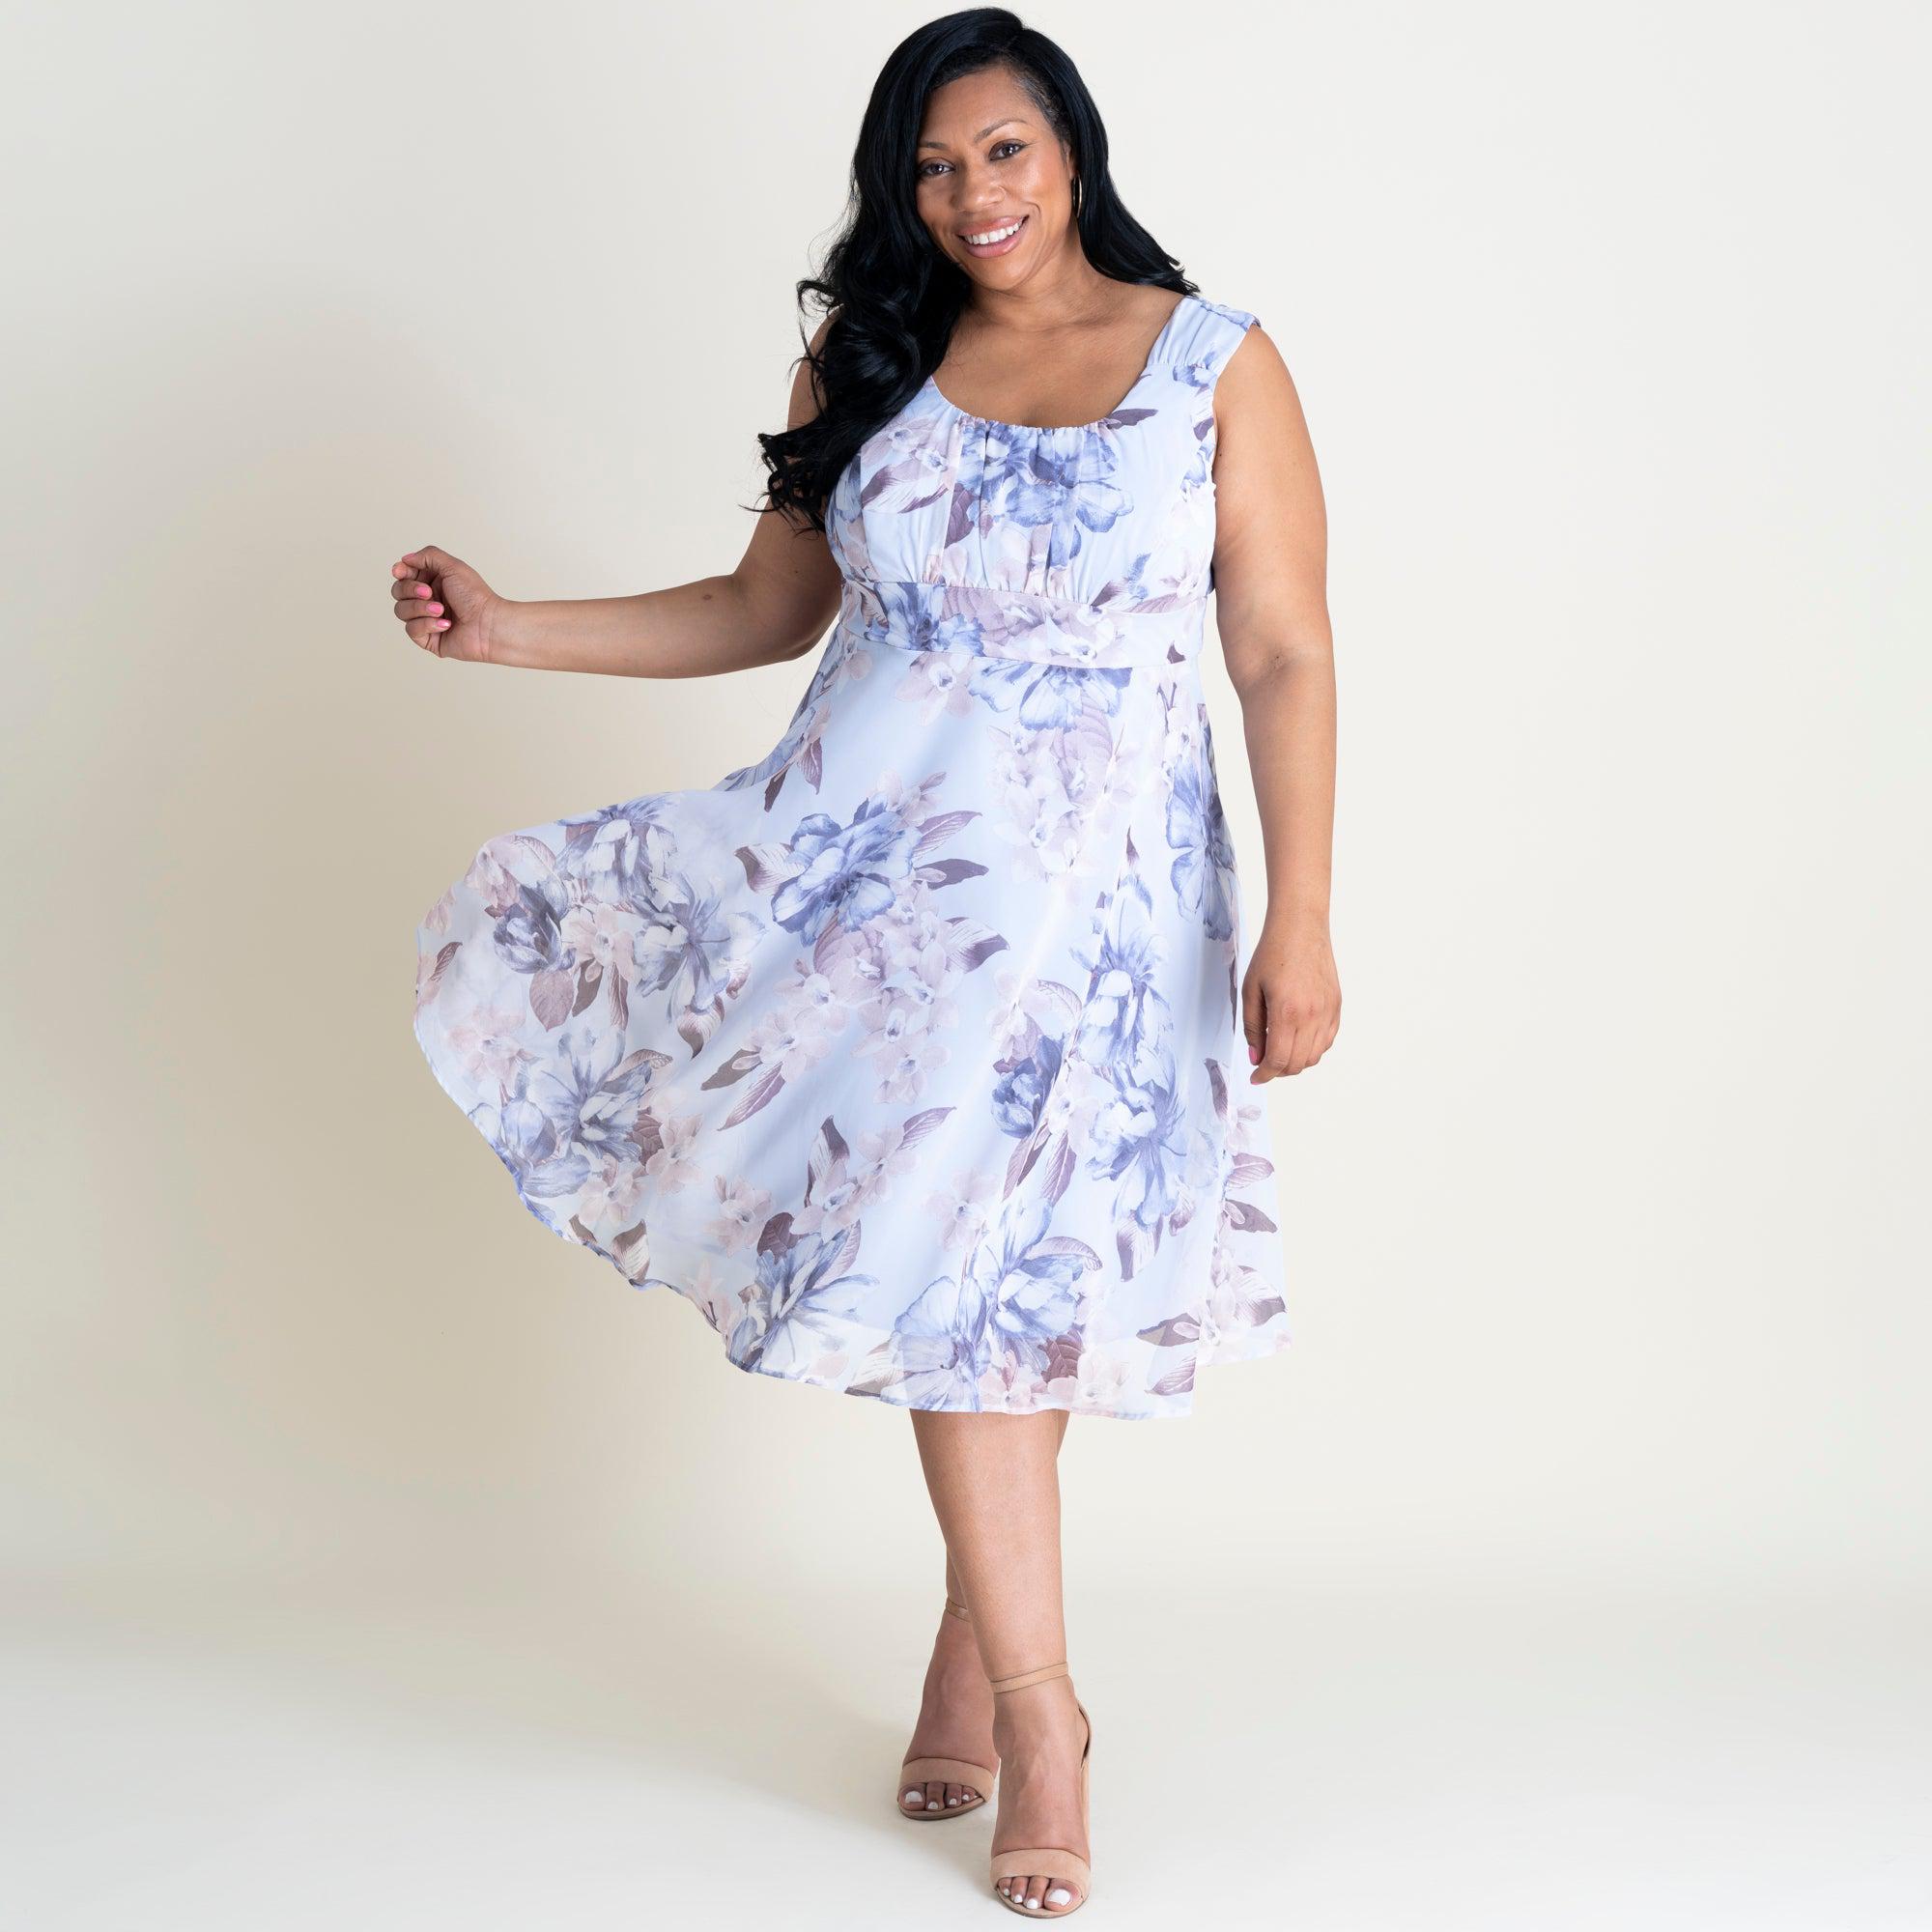 Woman posing wearing Silver Carly Silver Floral Chiffon Dress from Connected Apparel